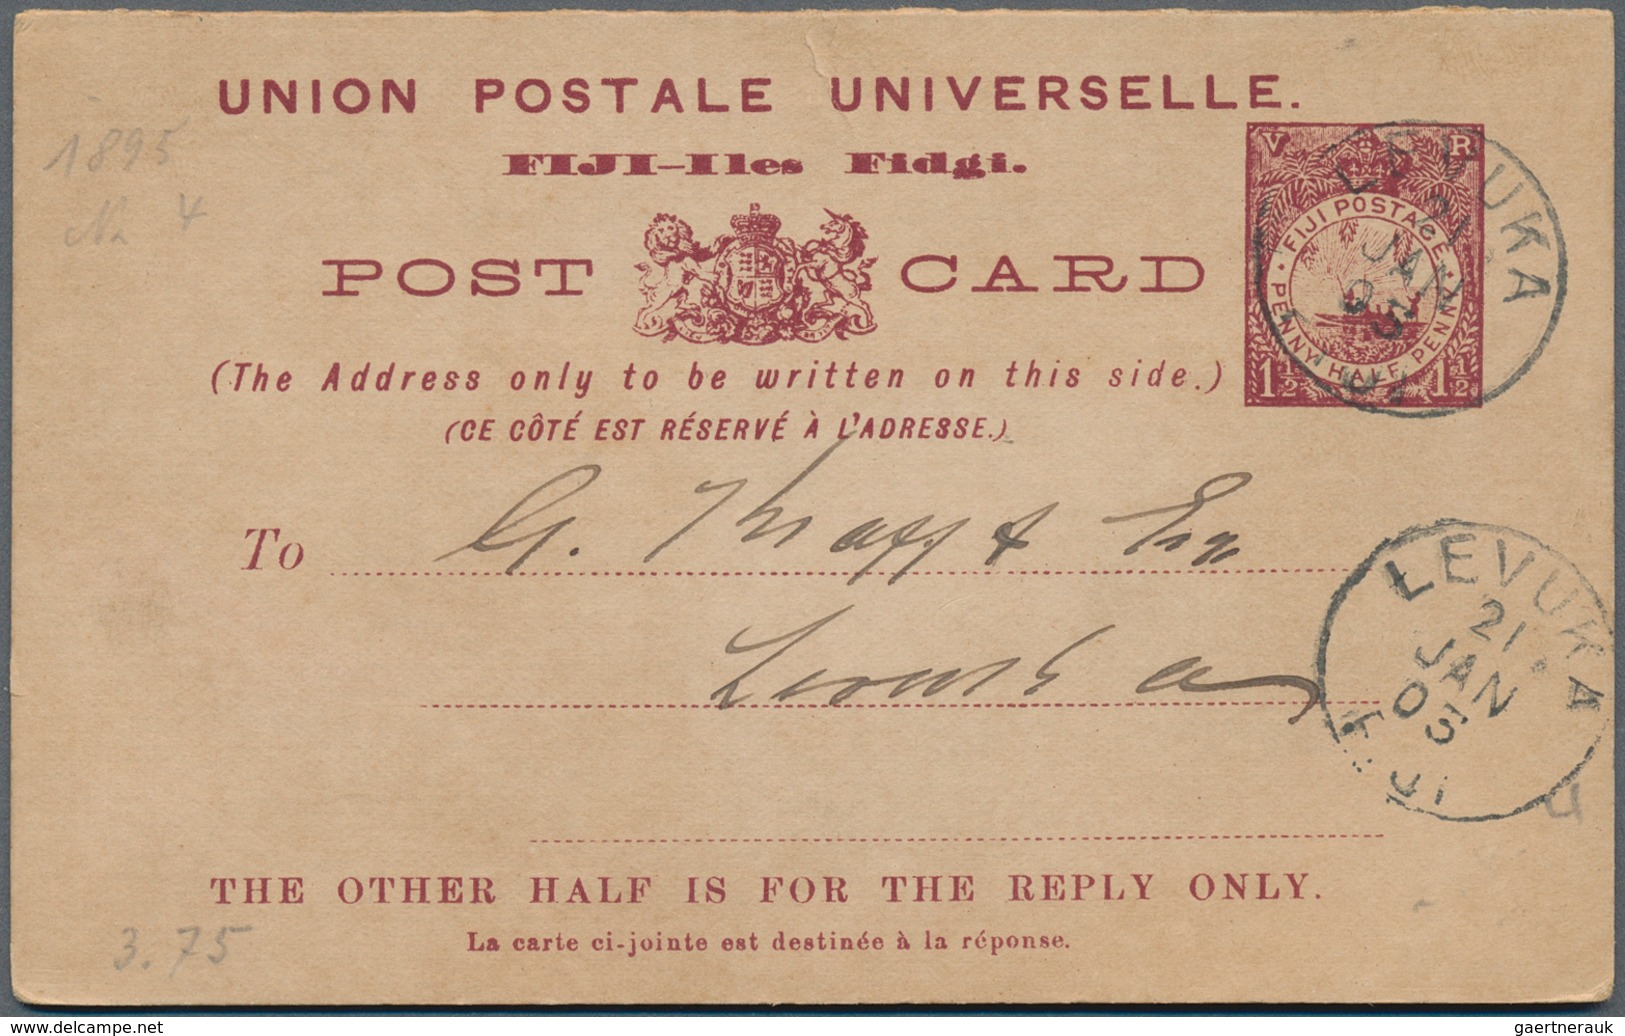 British Commonwealth: 1880's-1930's ca.: 86 postal stationery items from various countries, most of